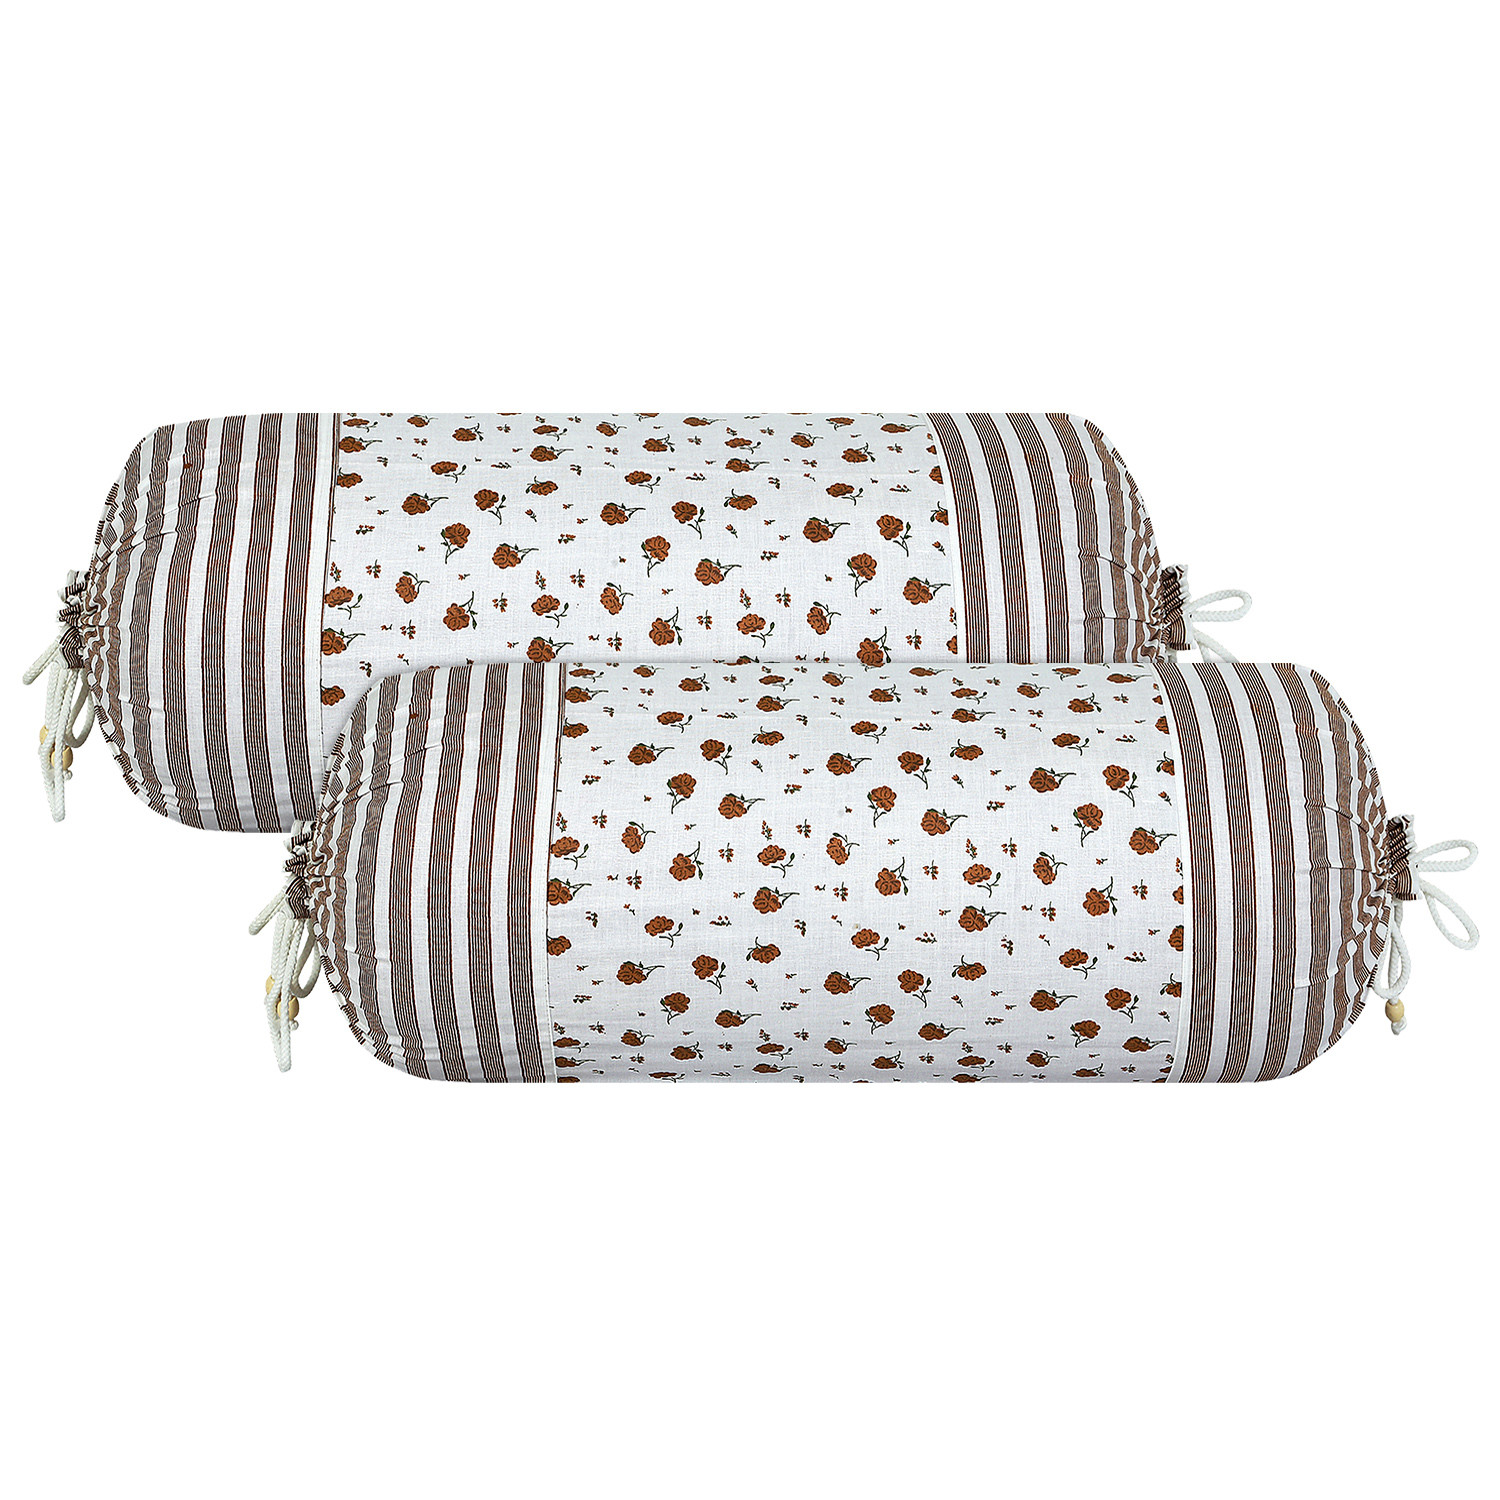 Kuber Industries Bolster Covers | Cotton Bolster Cover Set | Diwan Bolster Cover Set | Bolster Pillow Cover | Brown Flower Masand Cover | 16x32 Inch |White